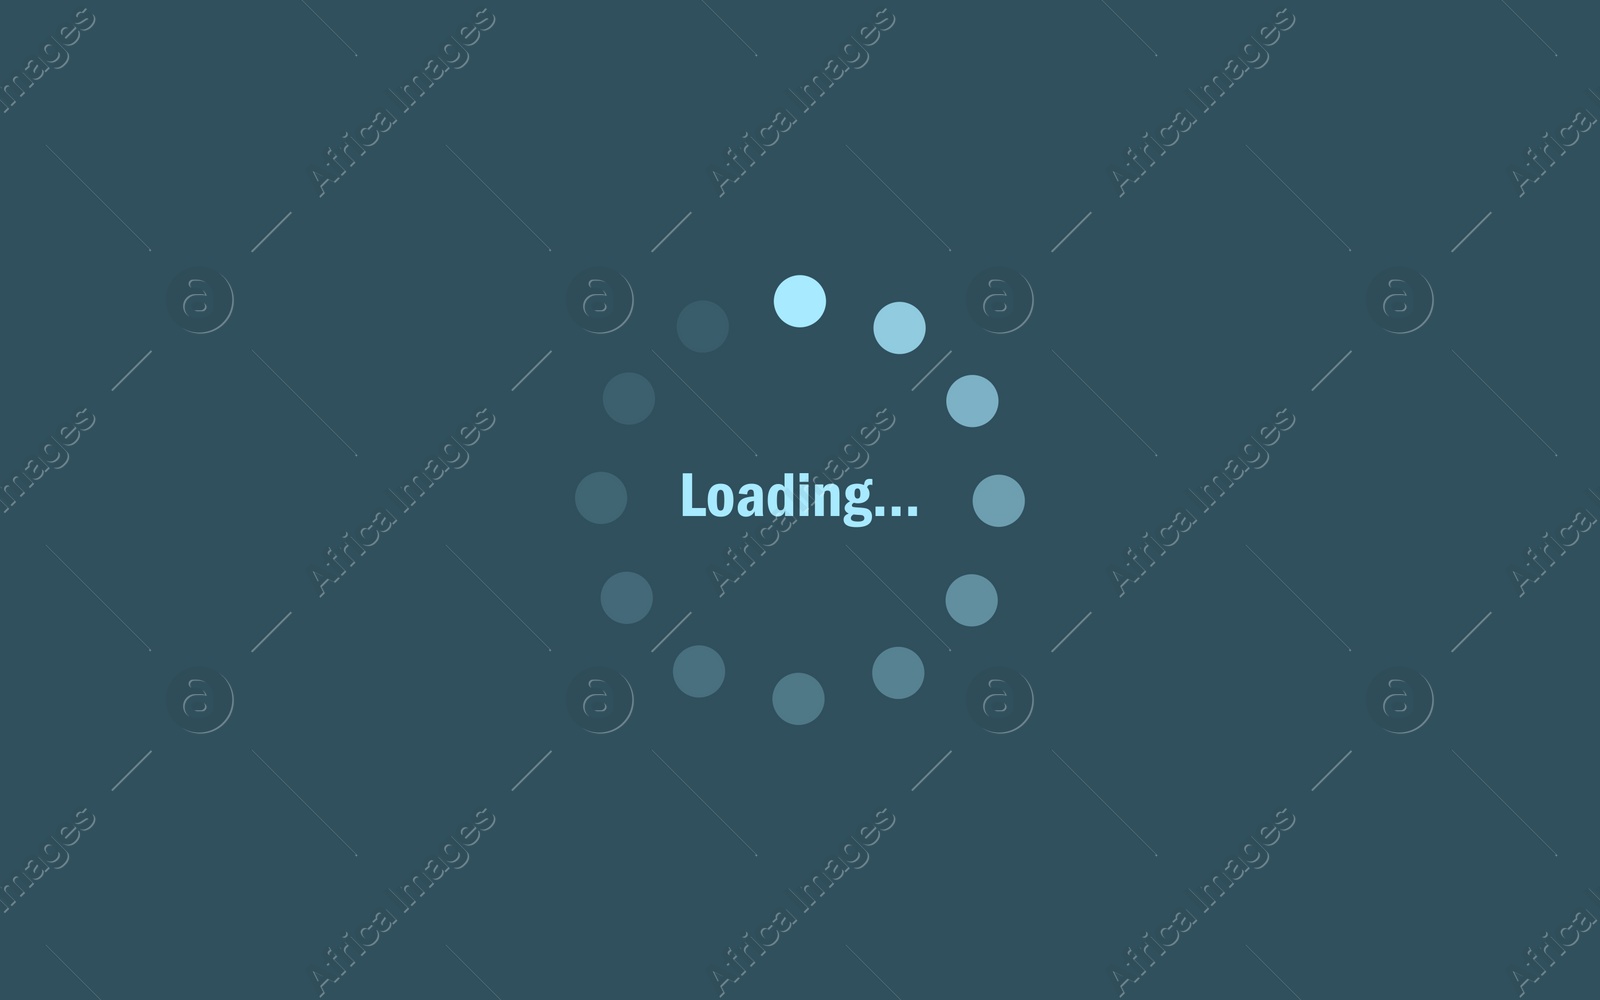 Image of Loading process screen. Illustration on teal background